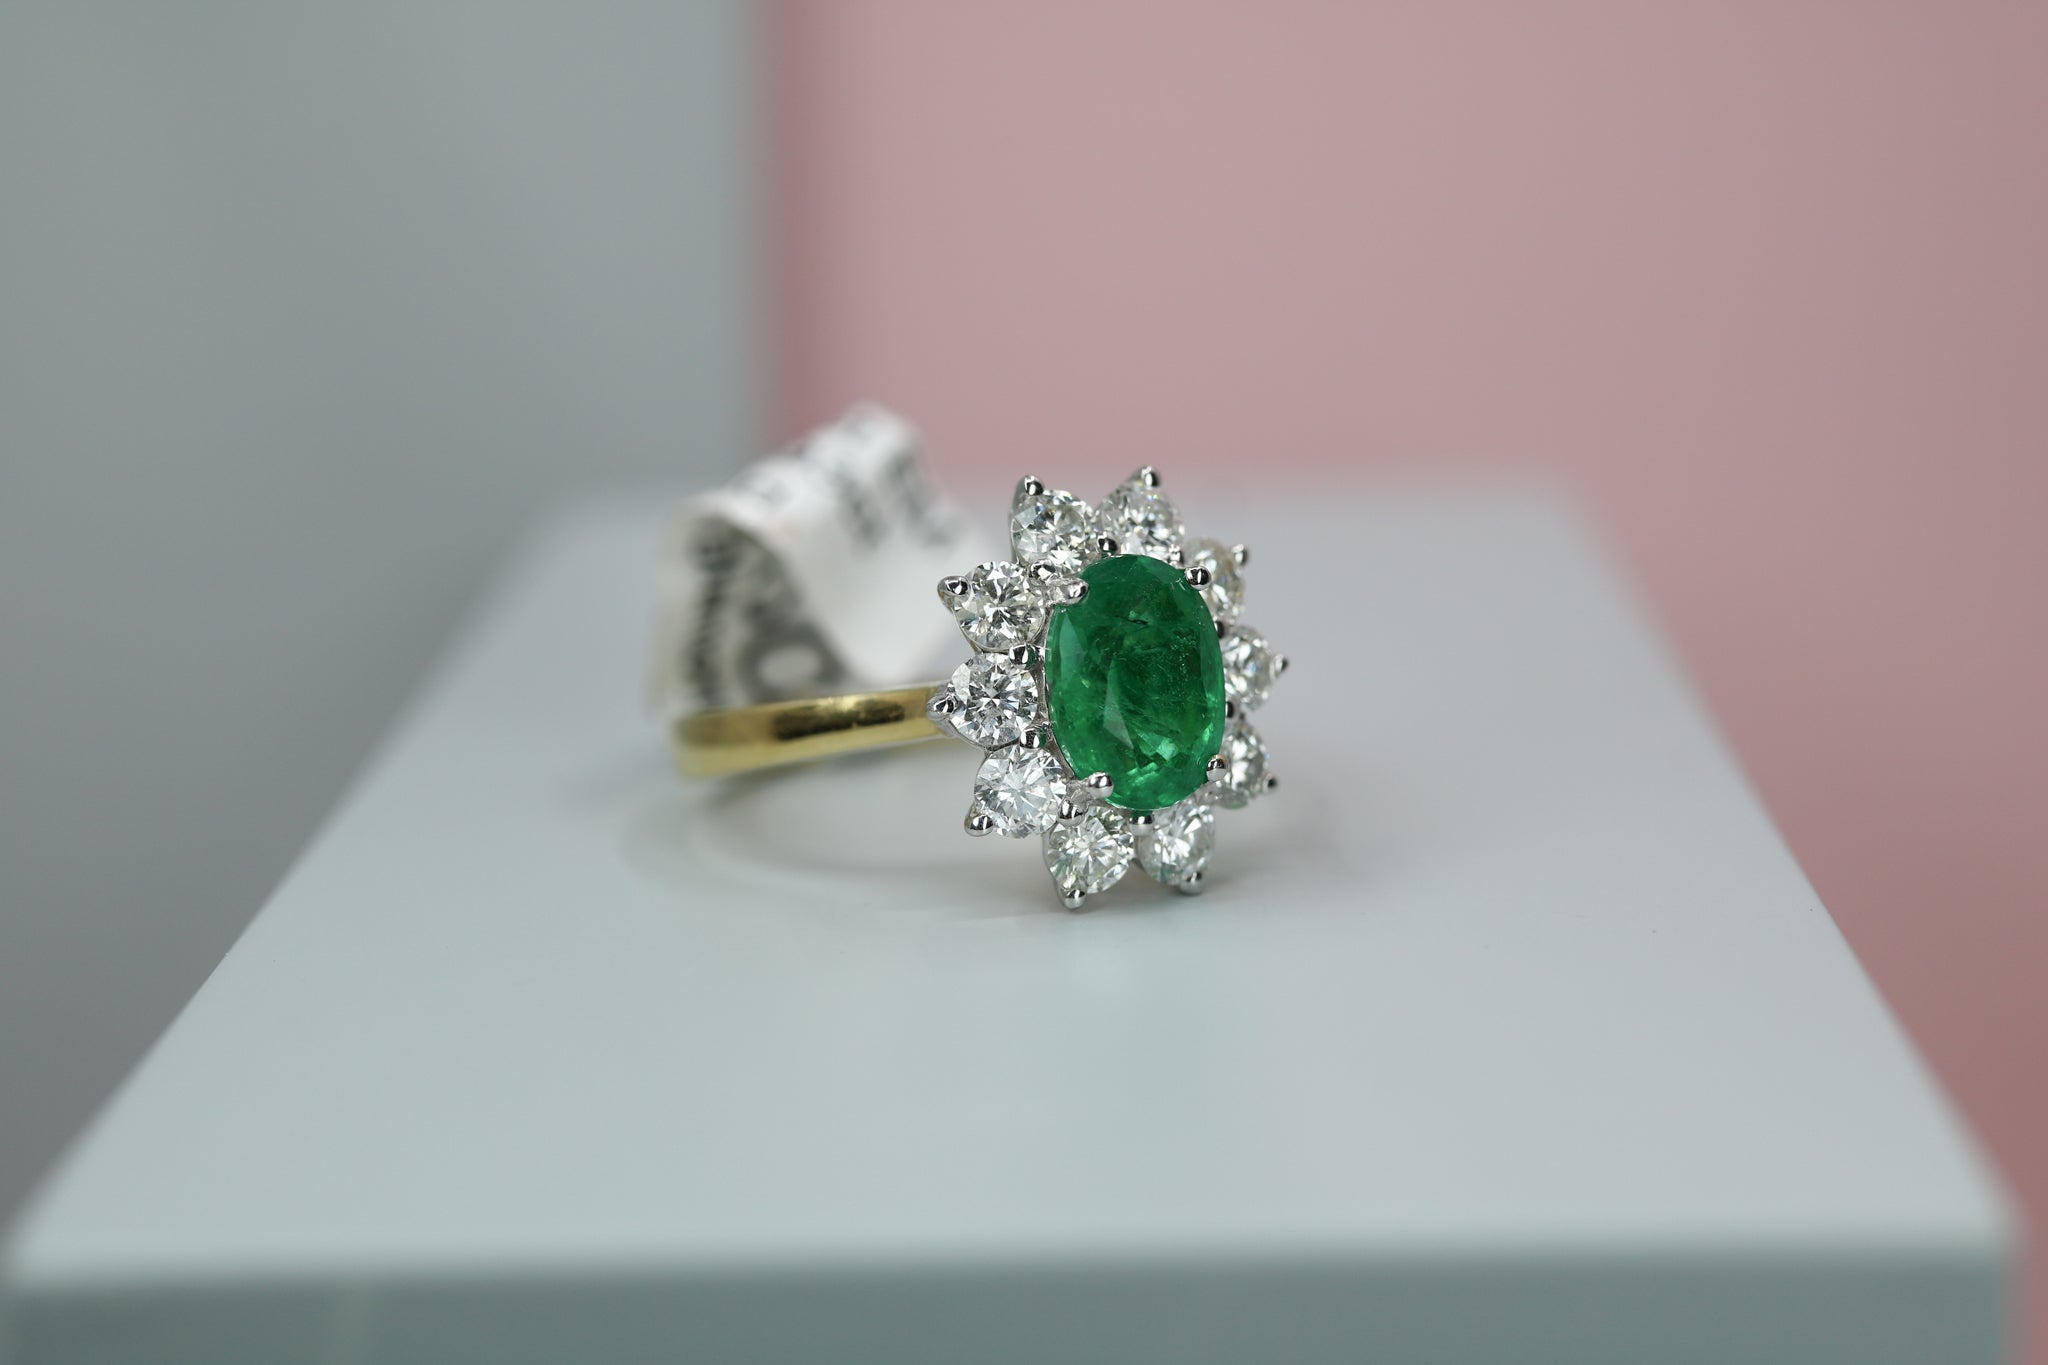 18ct Yellow Gold Diamond & Emerald Cluster Ring - HJ2078 - Hallmark Jewellers Formby & The Jewellers Bench Widnes